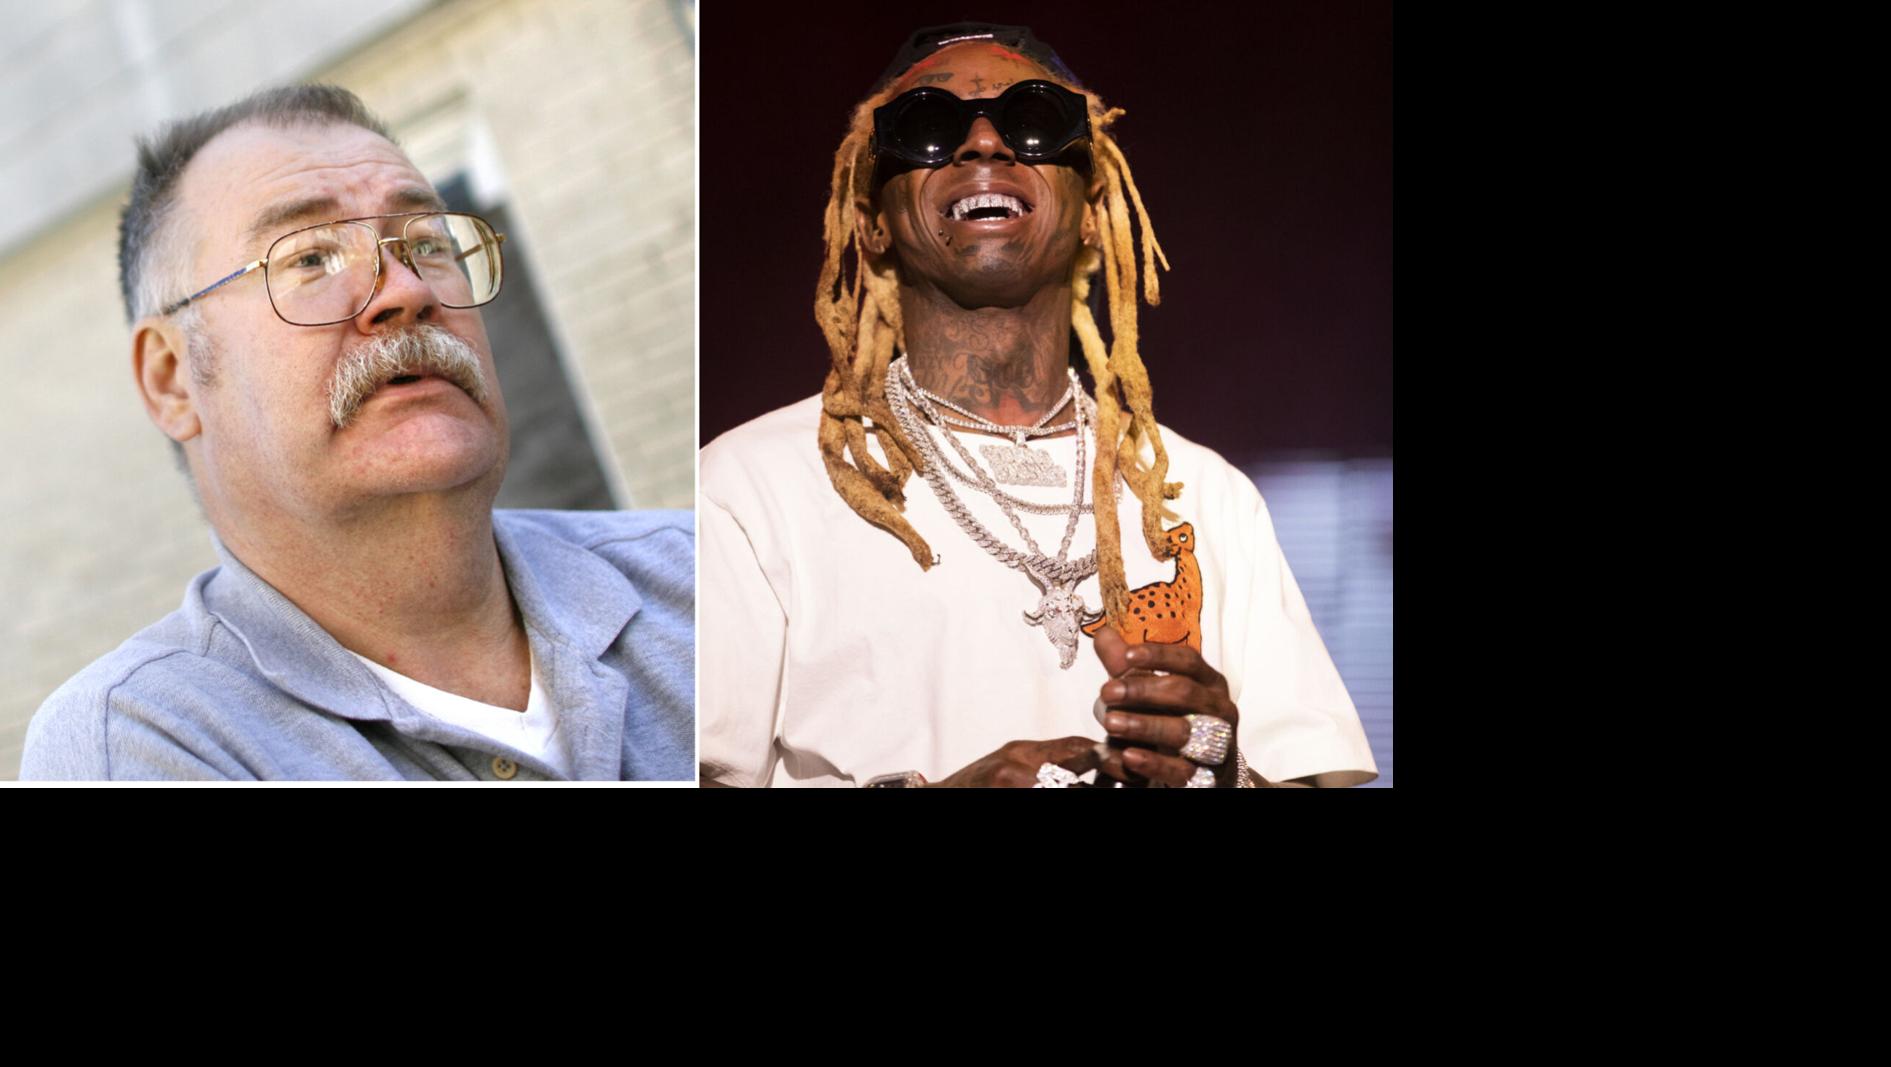 The New Orleans police officer who saved Lil Wayne's life dies at 65 |  Crime/Police | nola.com